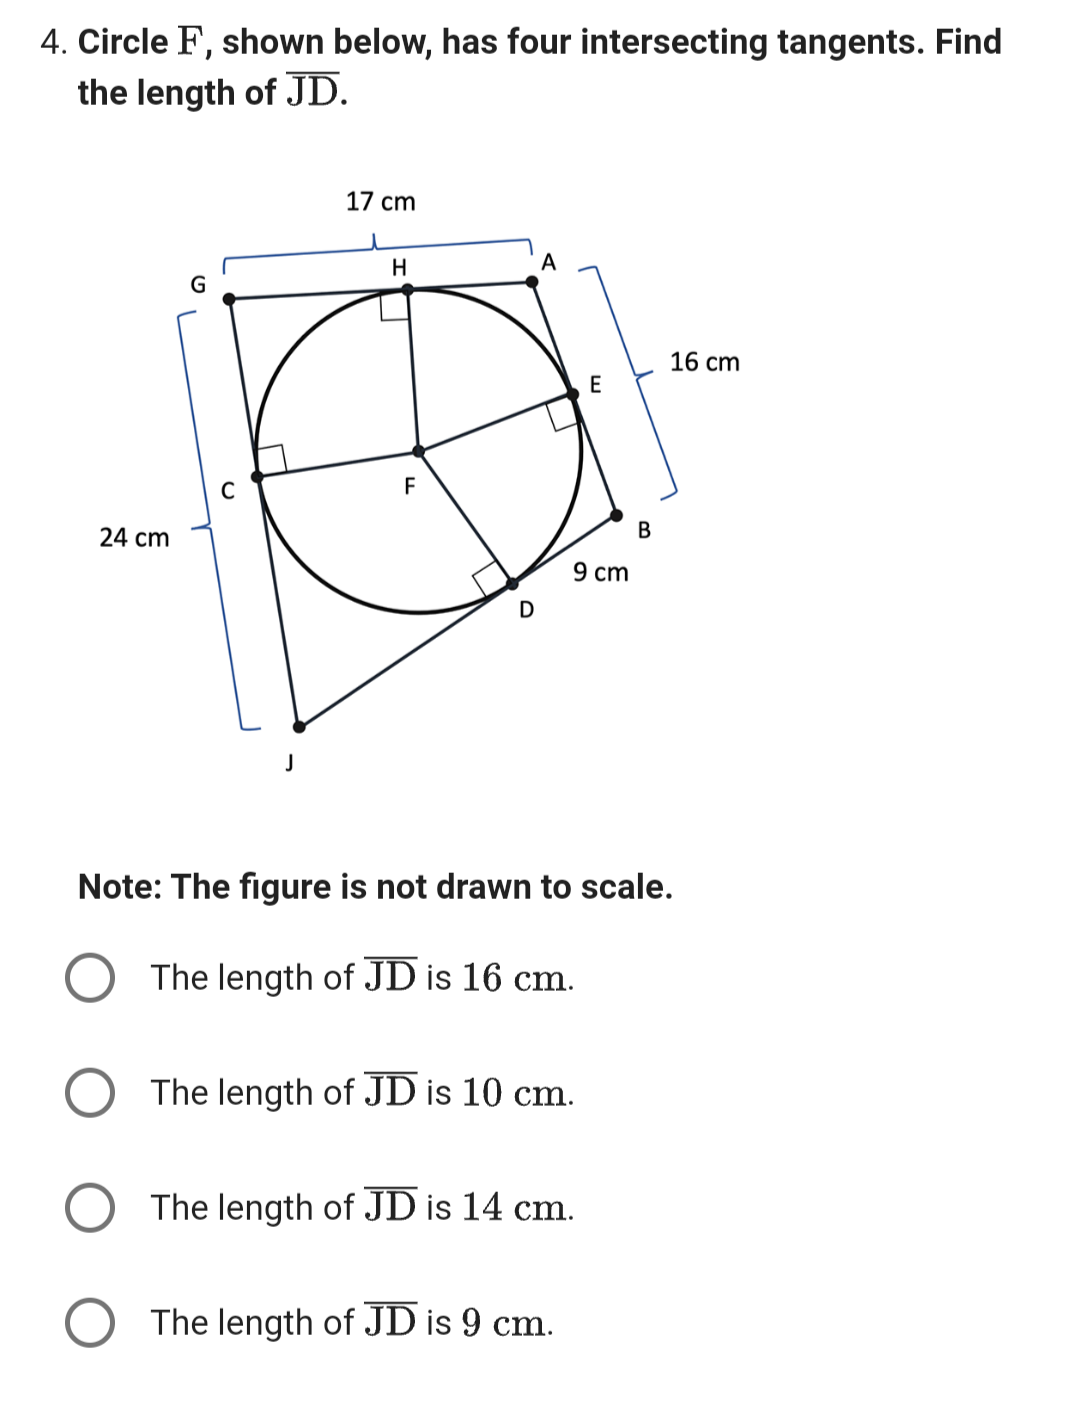 4. Circle F, shown below, has four intersecting tangents. Find
the length of JD.
24 cm
G
C
J
17 cm
H
F
D
A
9 cm
The length of JD is 10 cm.
Note: The figure is not drawn to scale.
The length of JD is 16 cm.
The length of JD is 14 cm.
O The length of JD is 9 cm.
B
16 cm